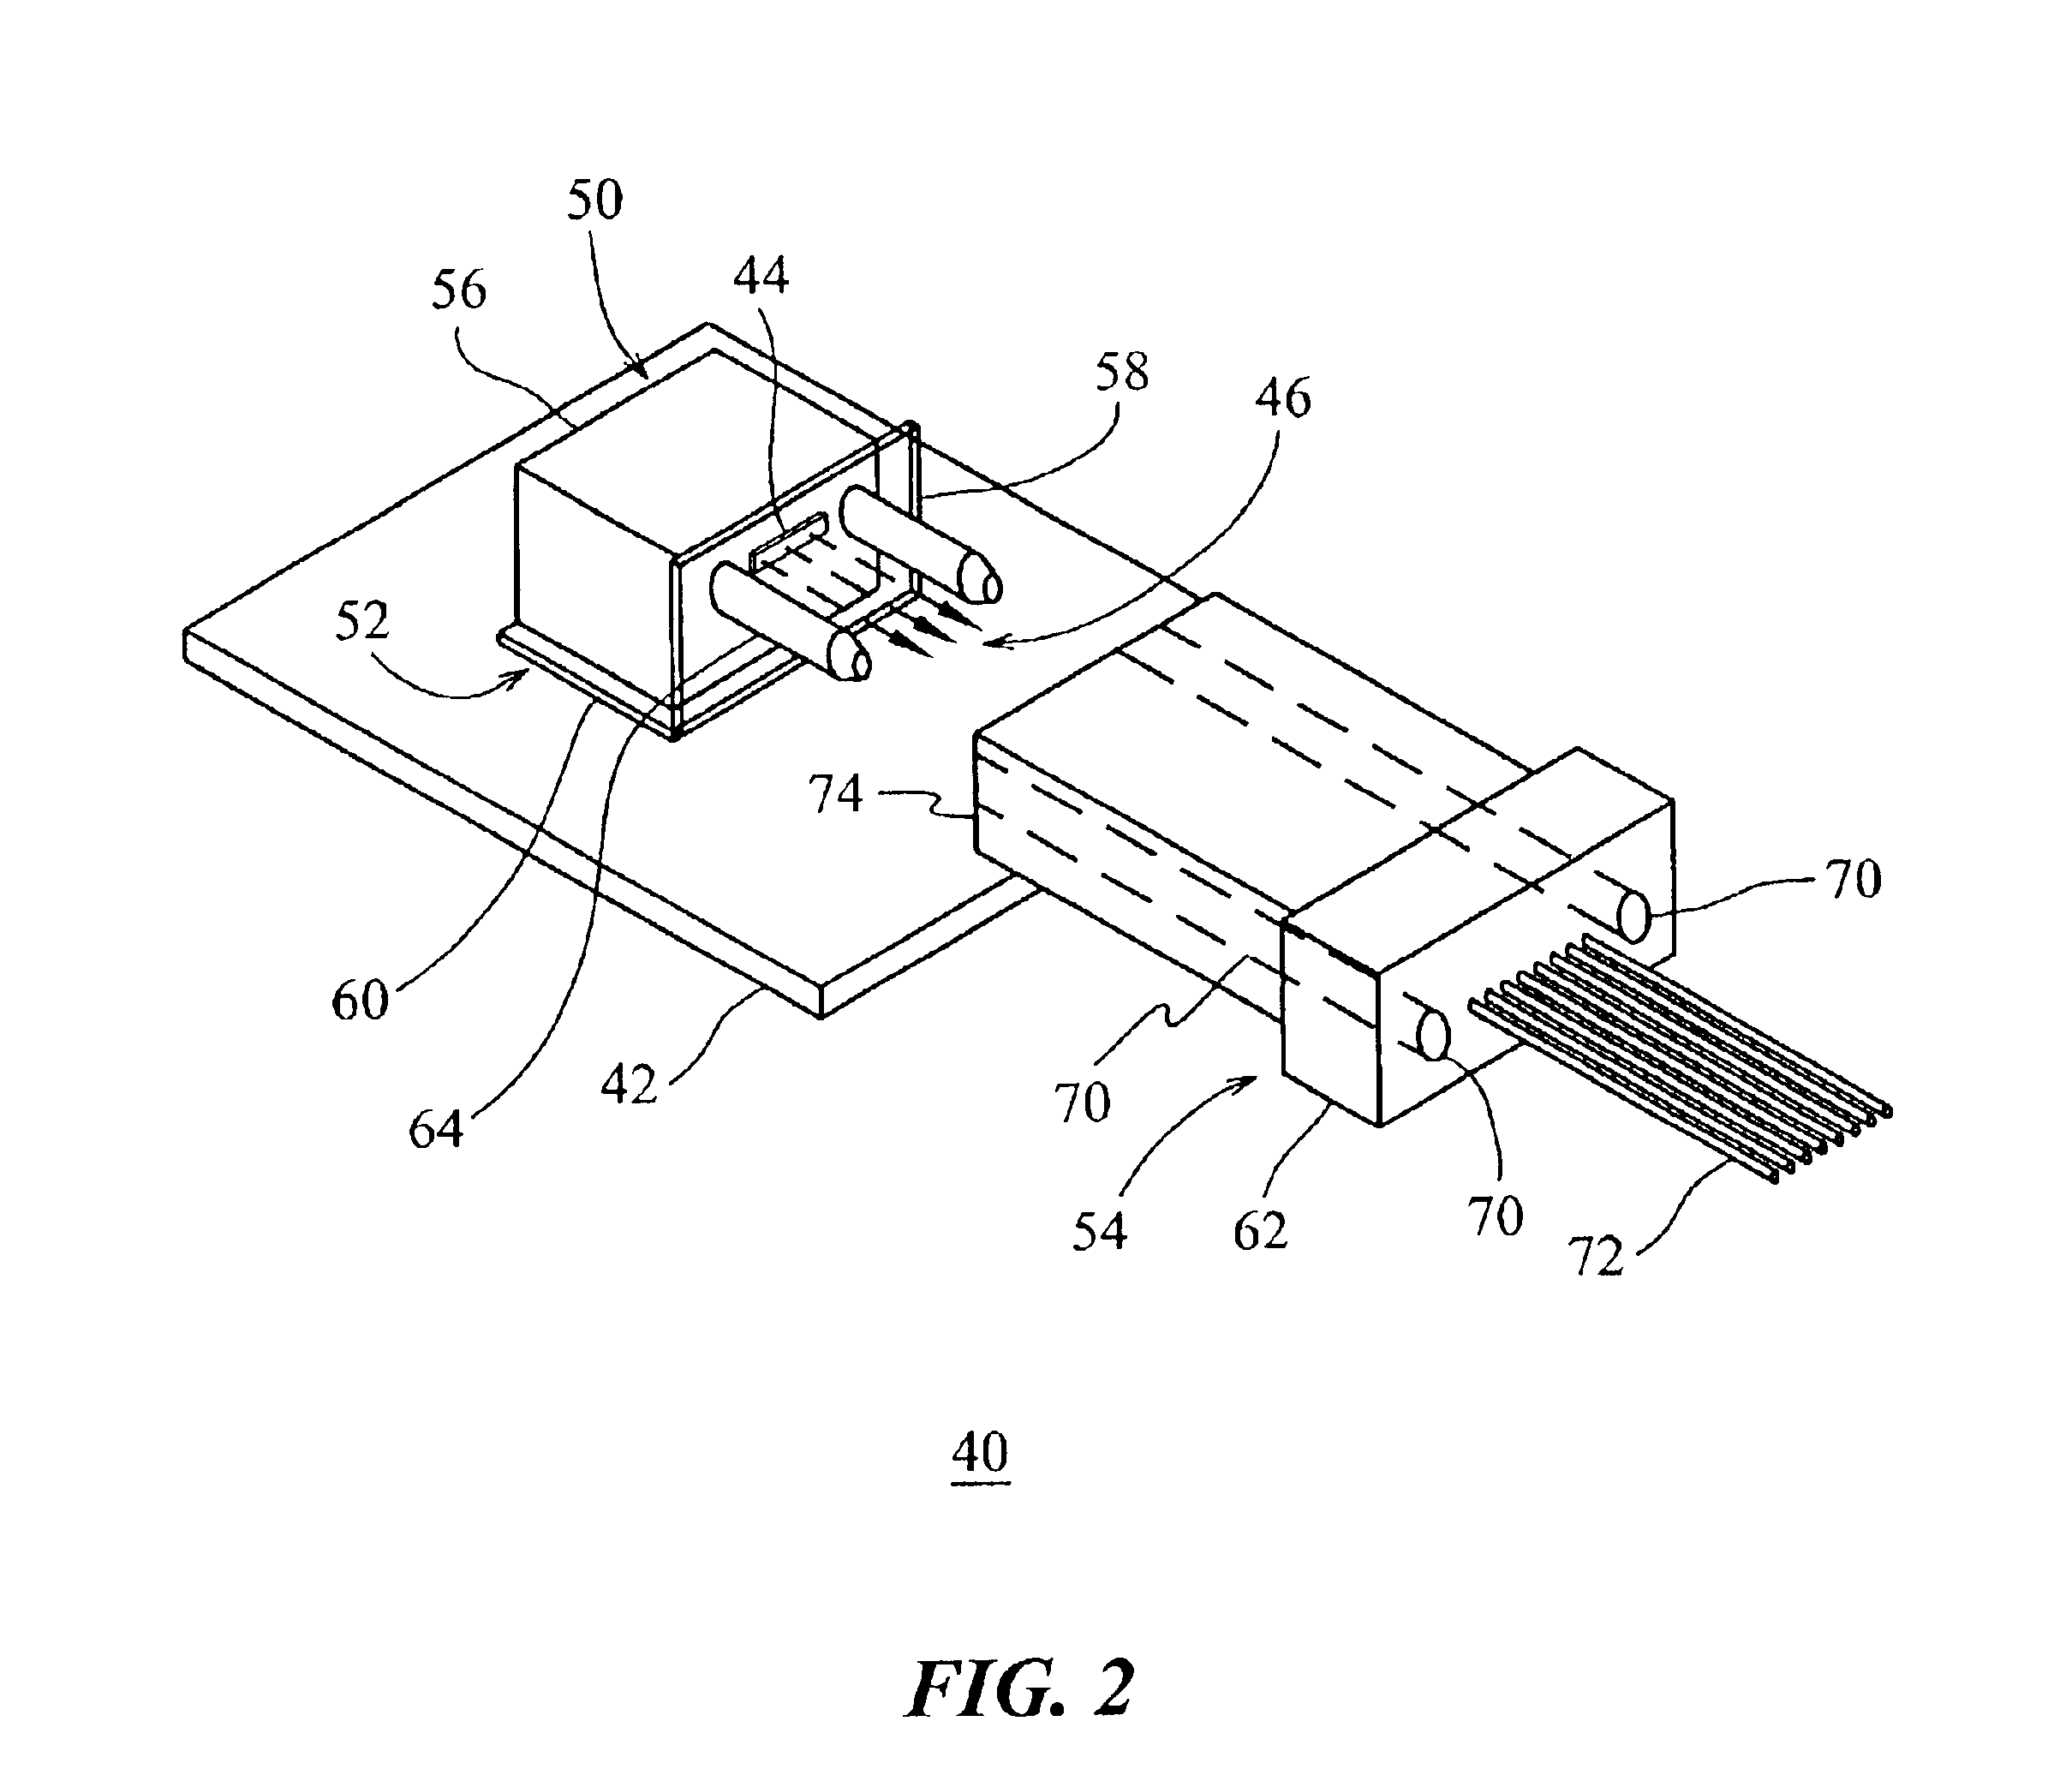 Method of attenuating an optical signal